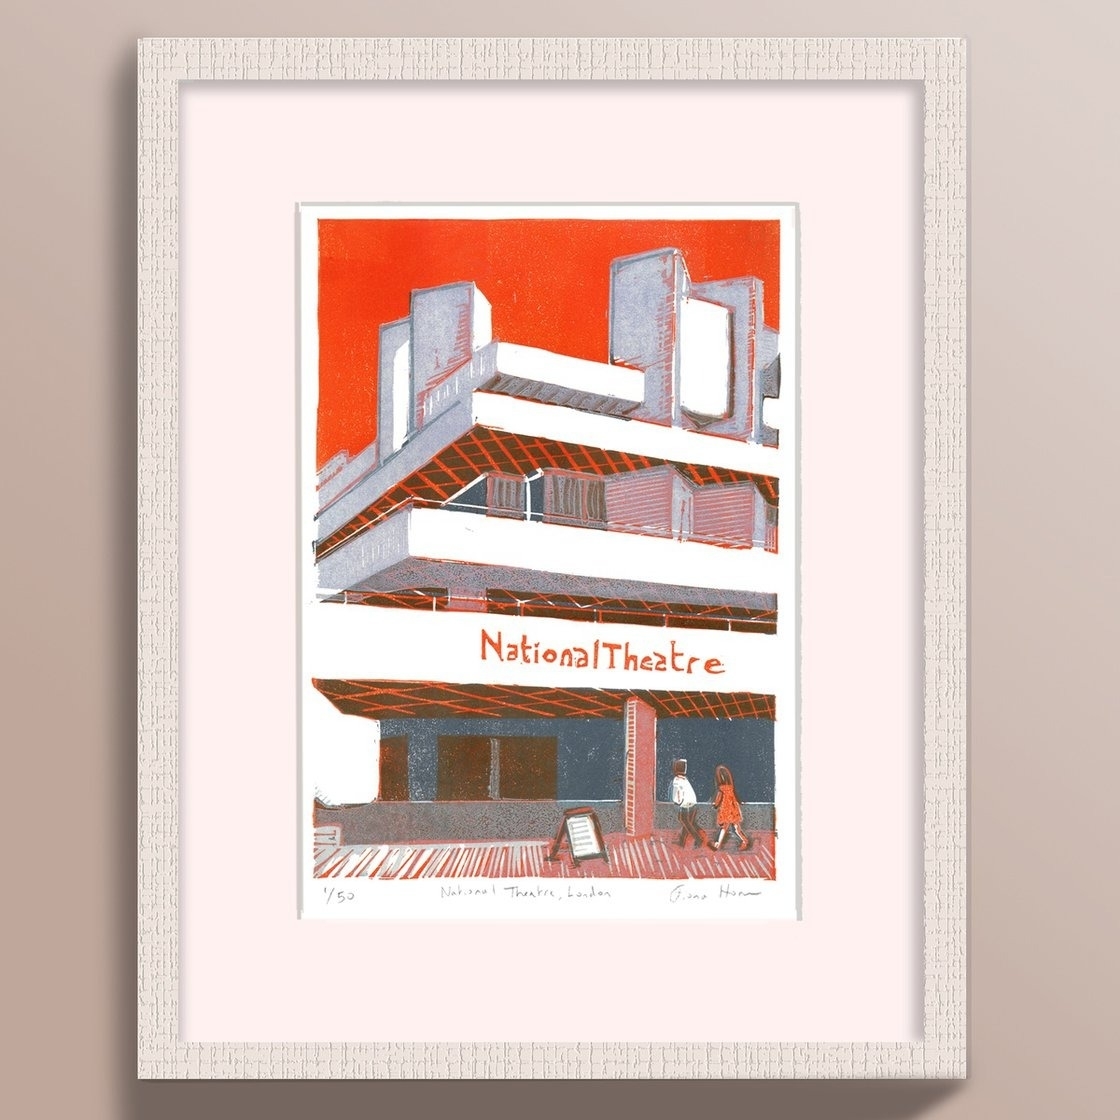 Art print of the National Theatre in London with stylized illustration, framed on a wall